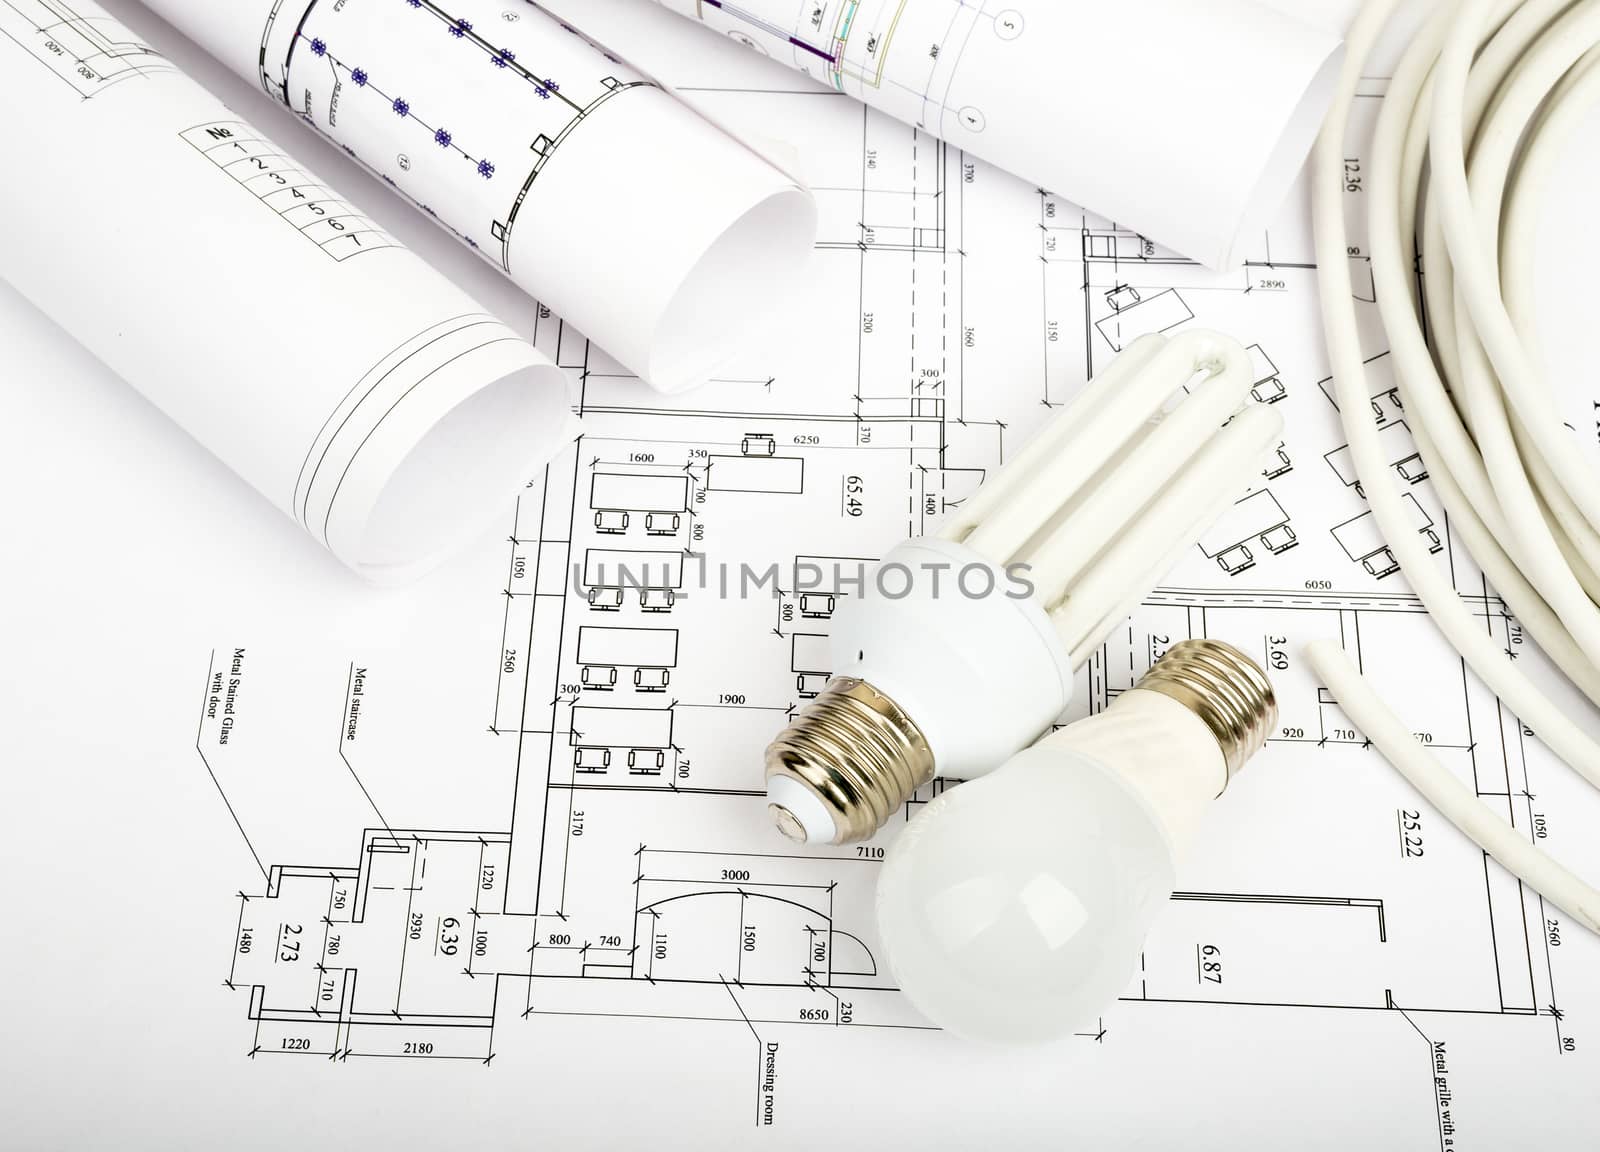 Architecture plan and rolls of blueprints with bulbs. Building concept